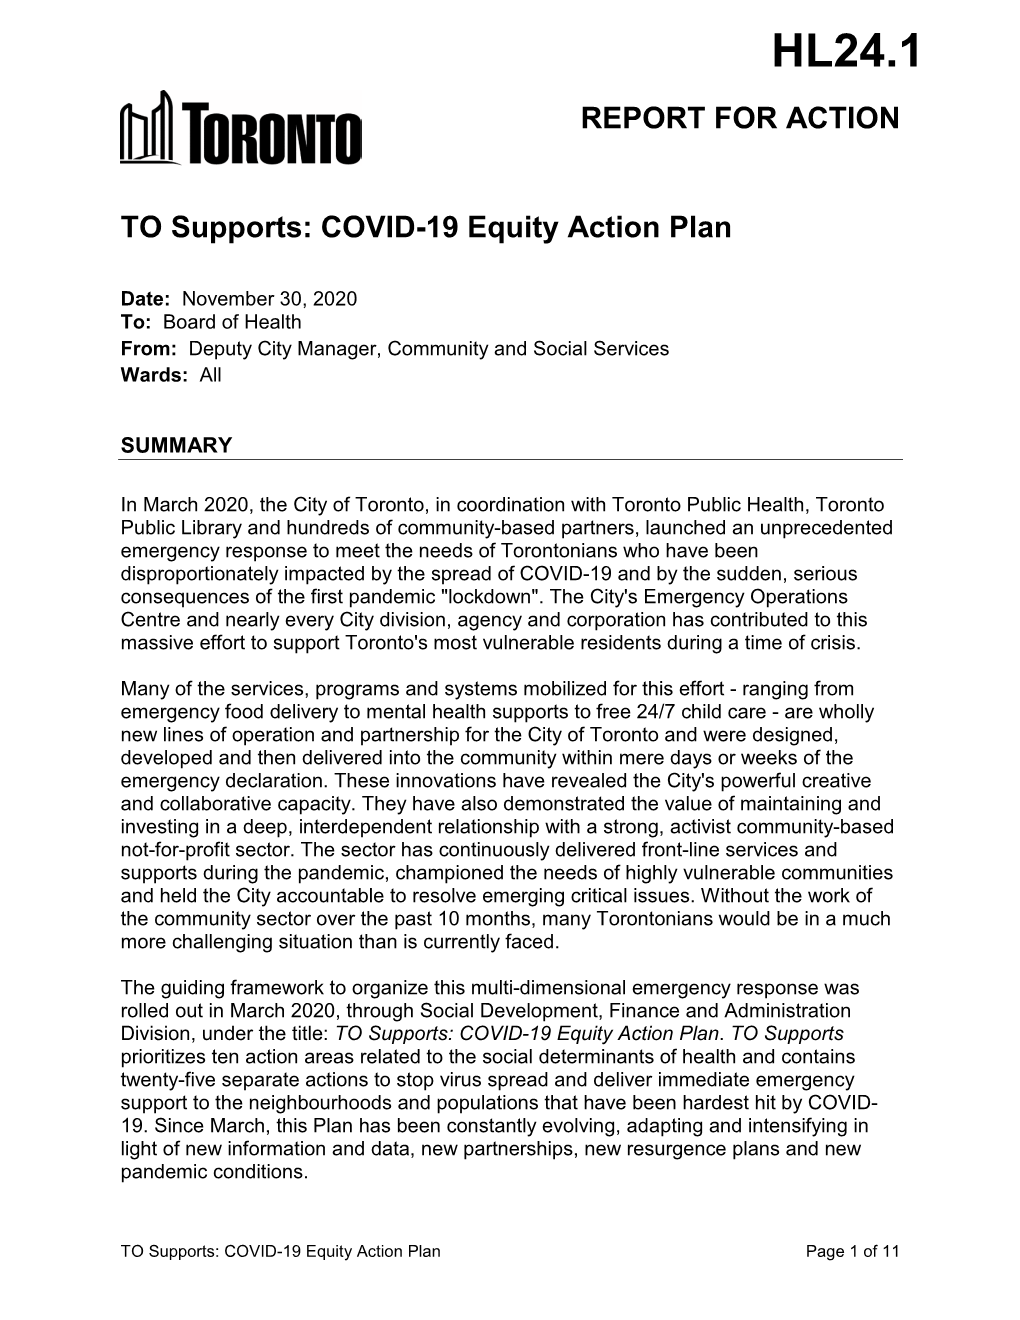 TO Supports: COVID-19 Equity Action Plan